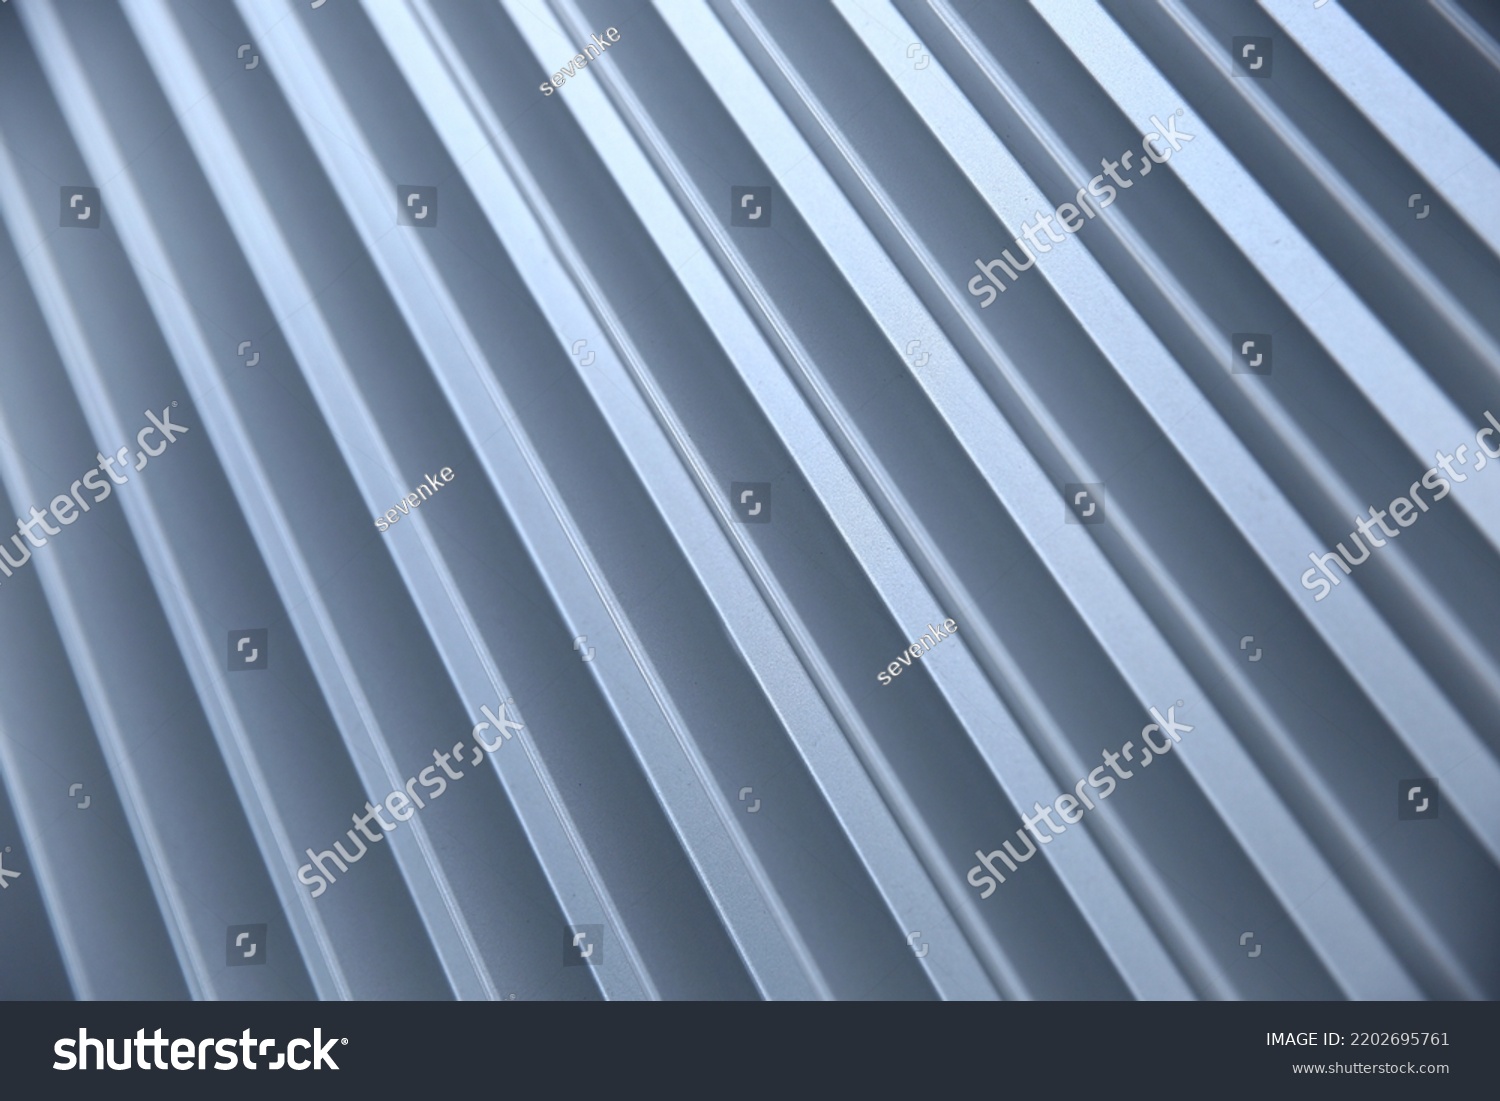 Gray Ribbed Background Diagonal Endless Lines Stock Photo 2202695761 ...